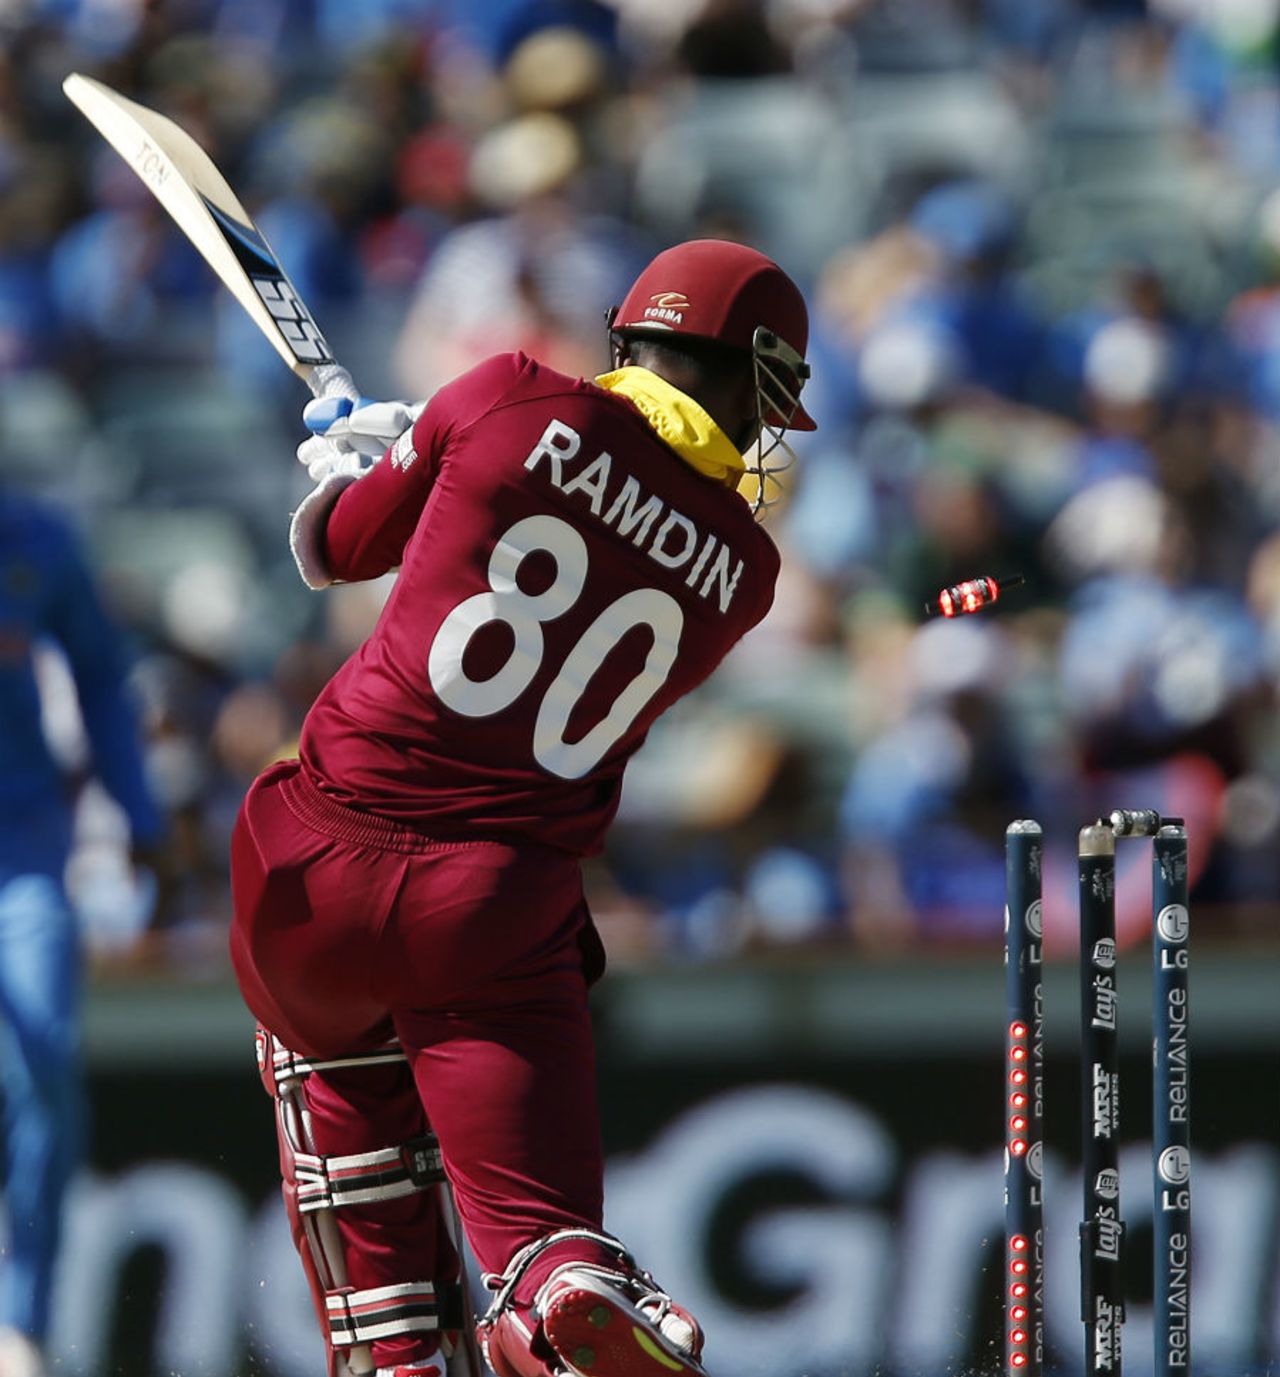 Denesh Ramdin plays onto his stumps, India v West Indies, World Cup 2015, Group B, Perth, March 6